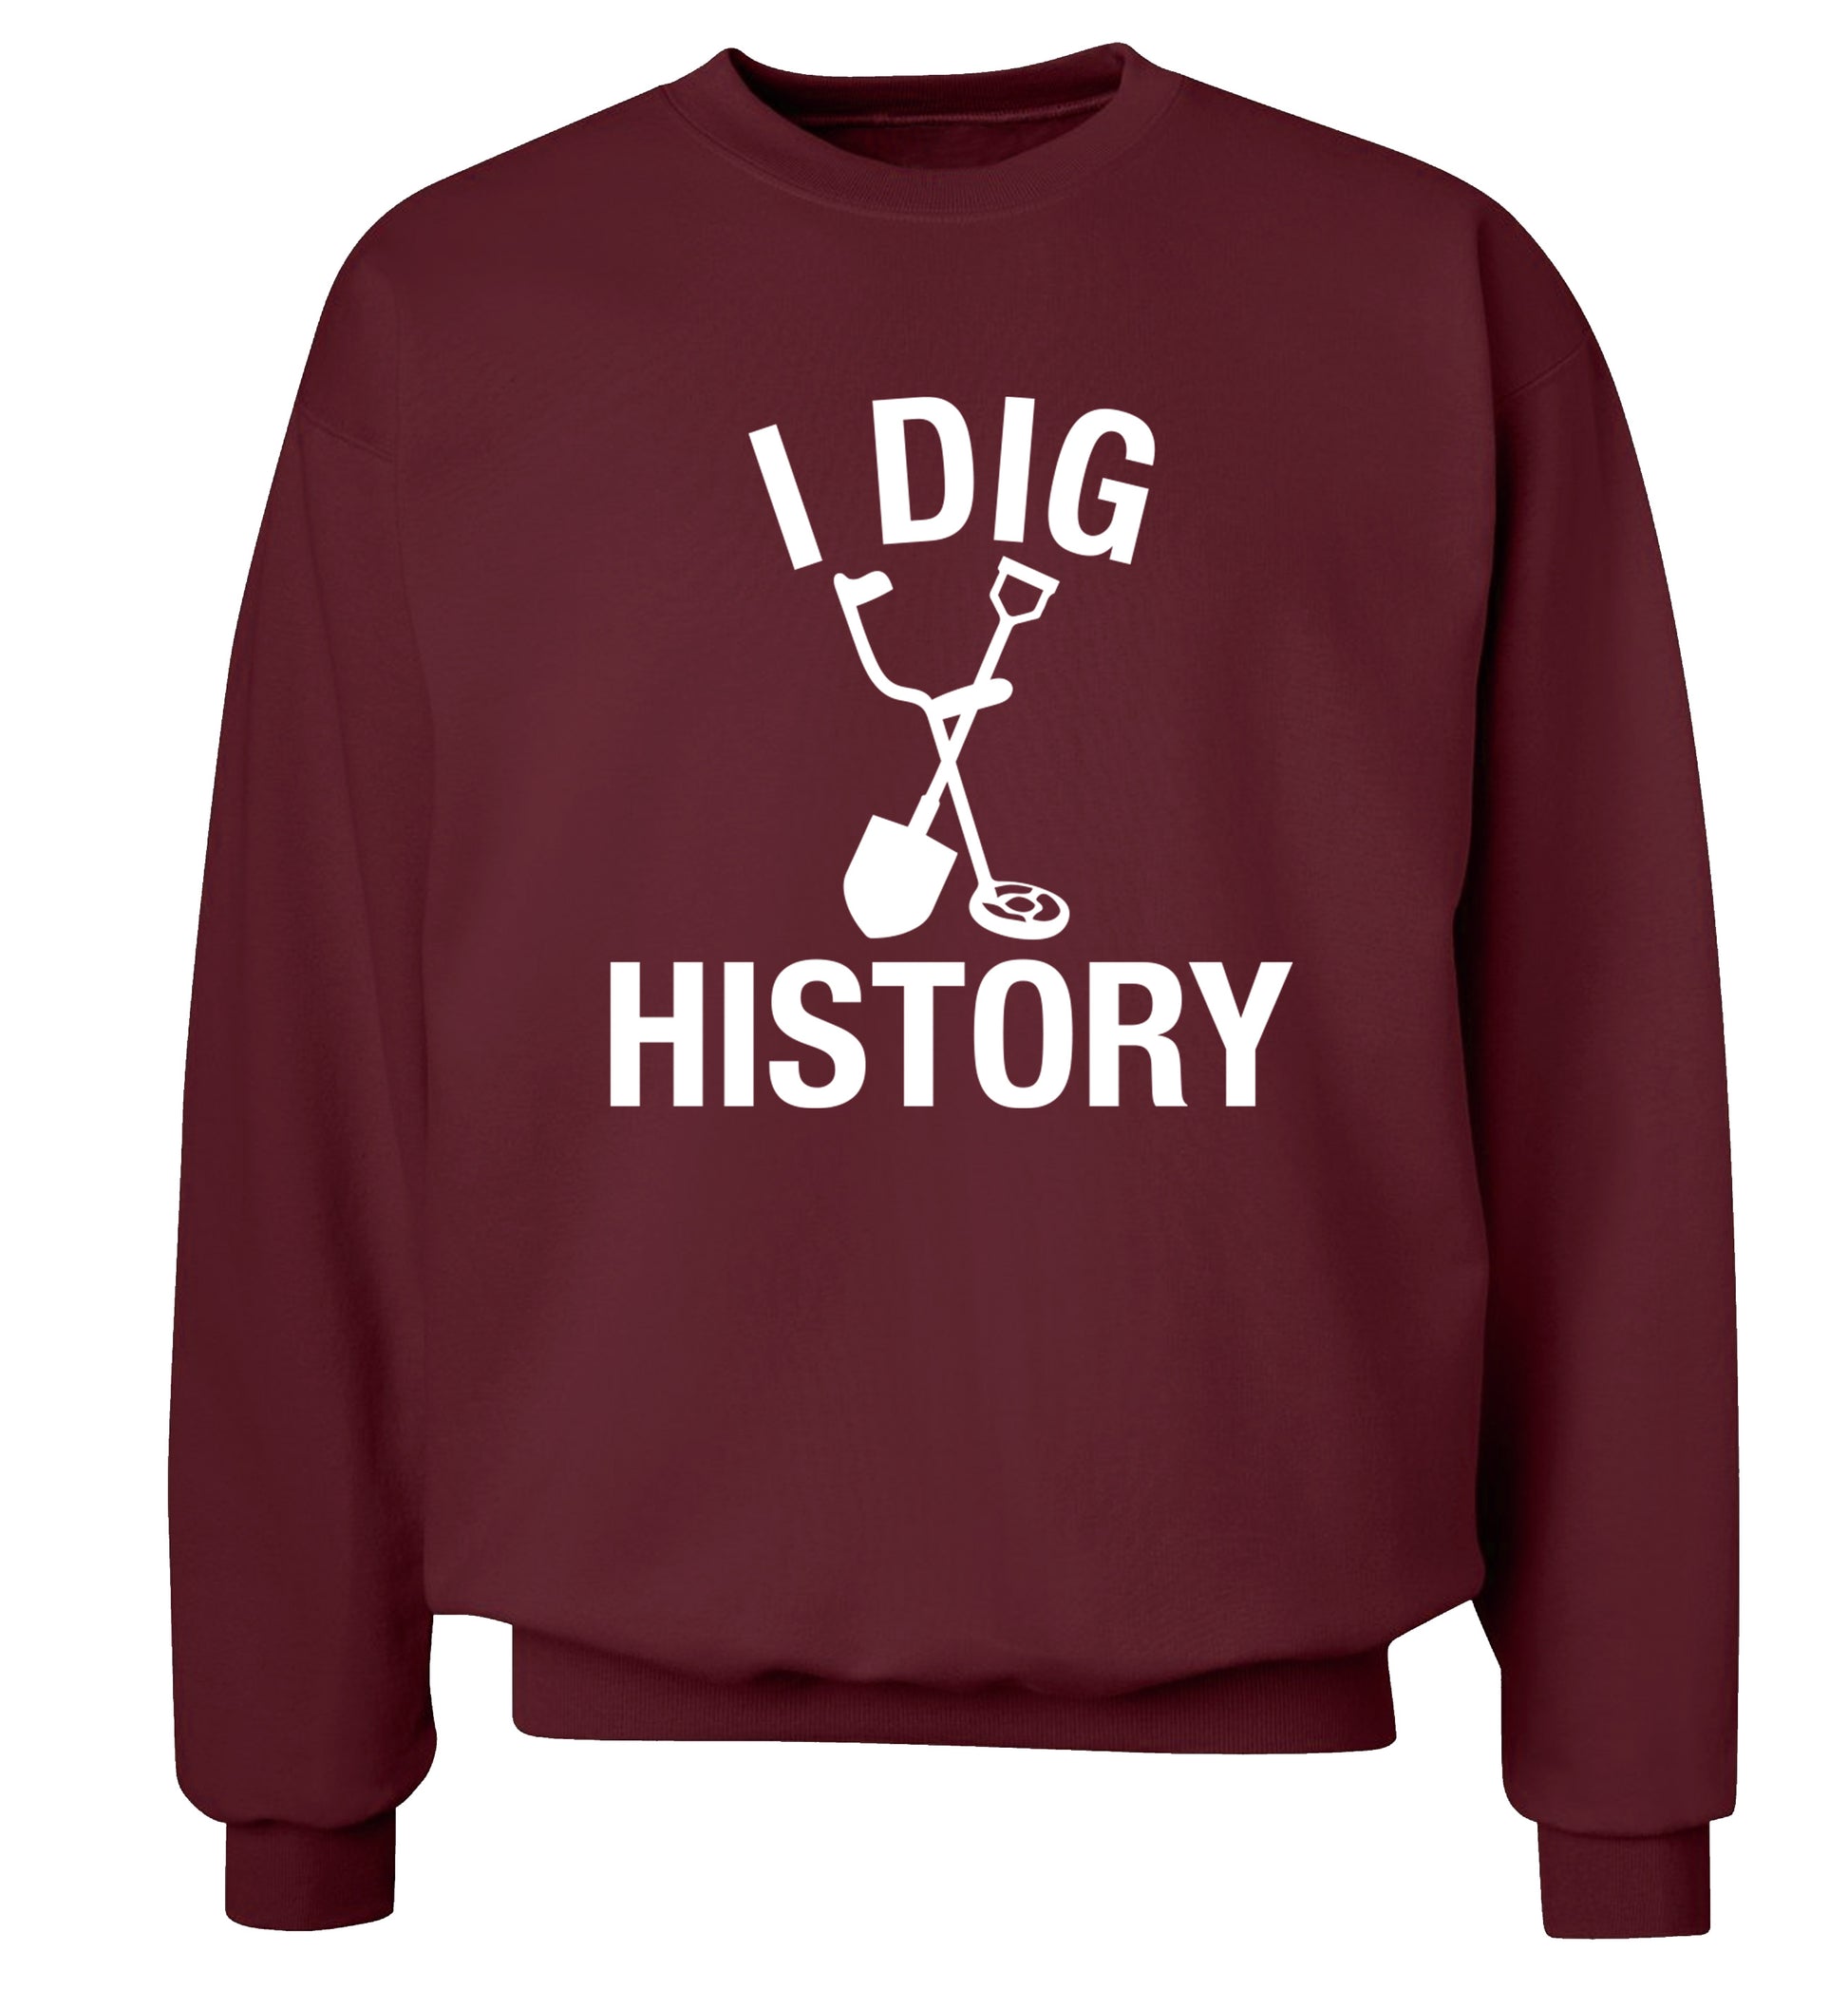 I dig history Adult's unisex maroon Sweater 2XL